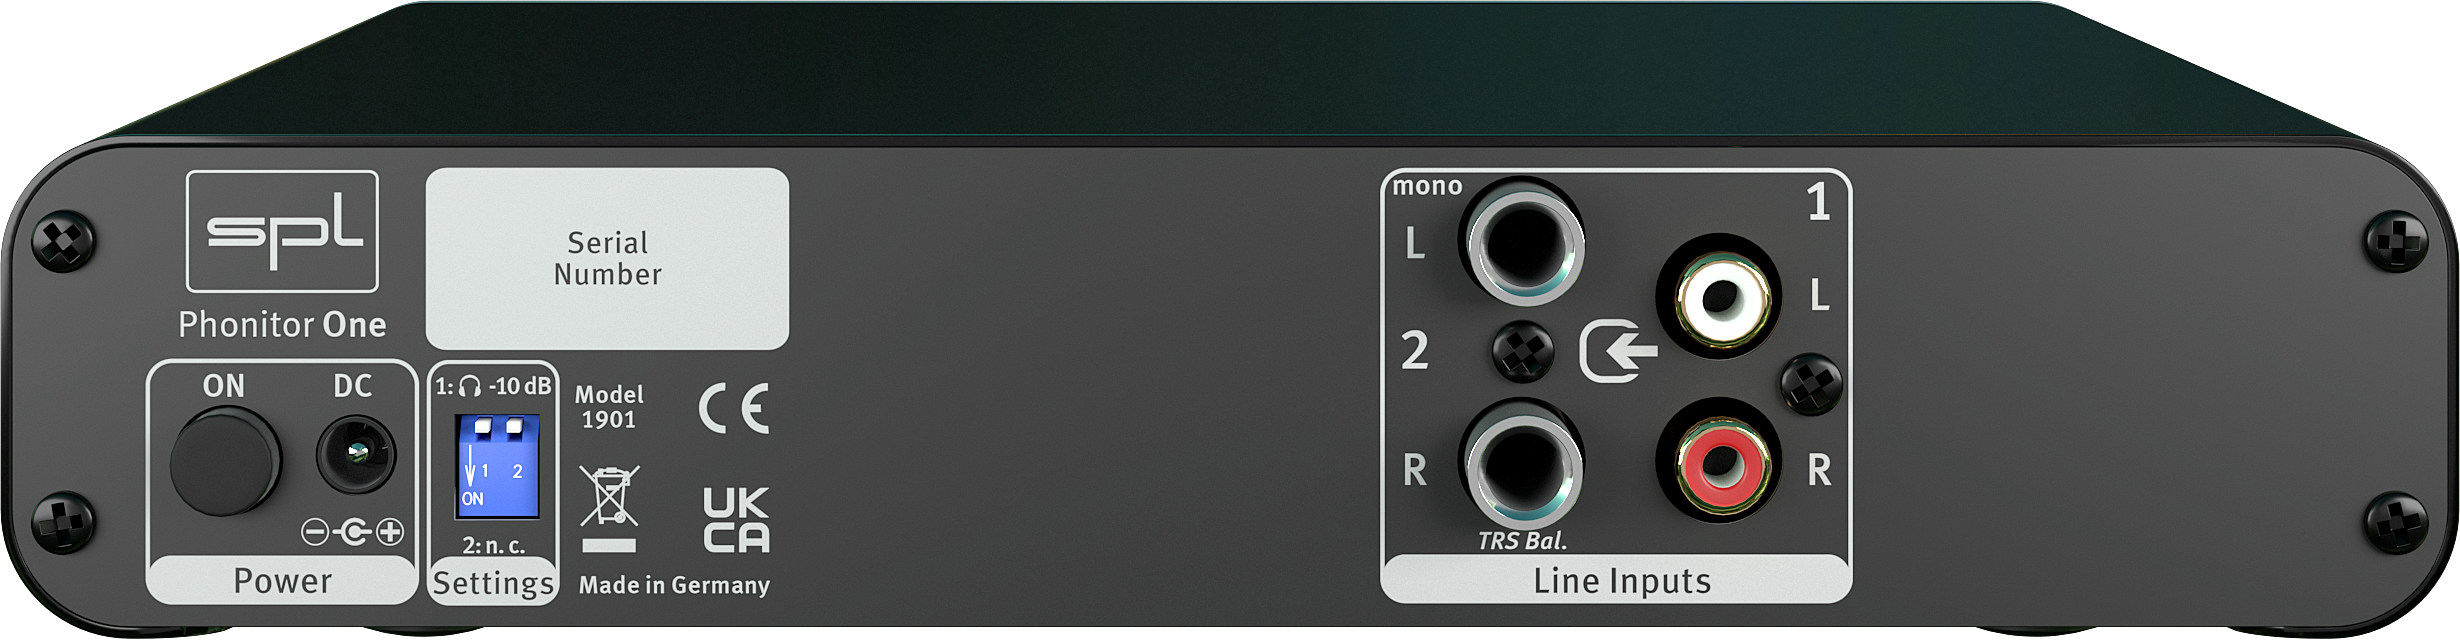 SPL Phonitor One inputs